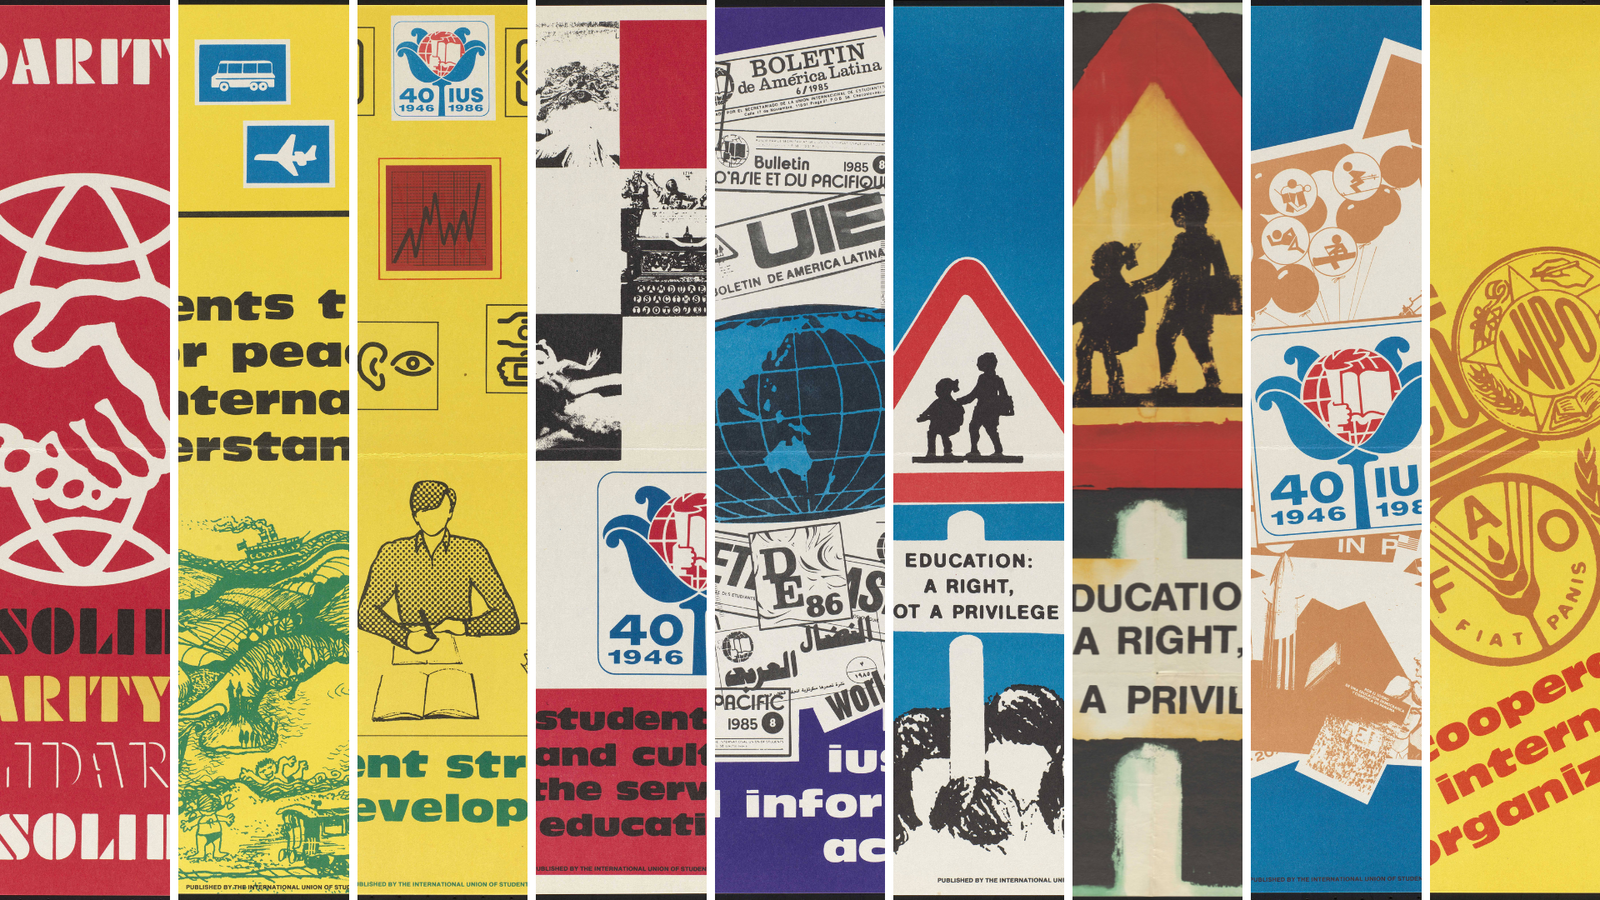 Posters from the International Union of Students, 1978, 1986